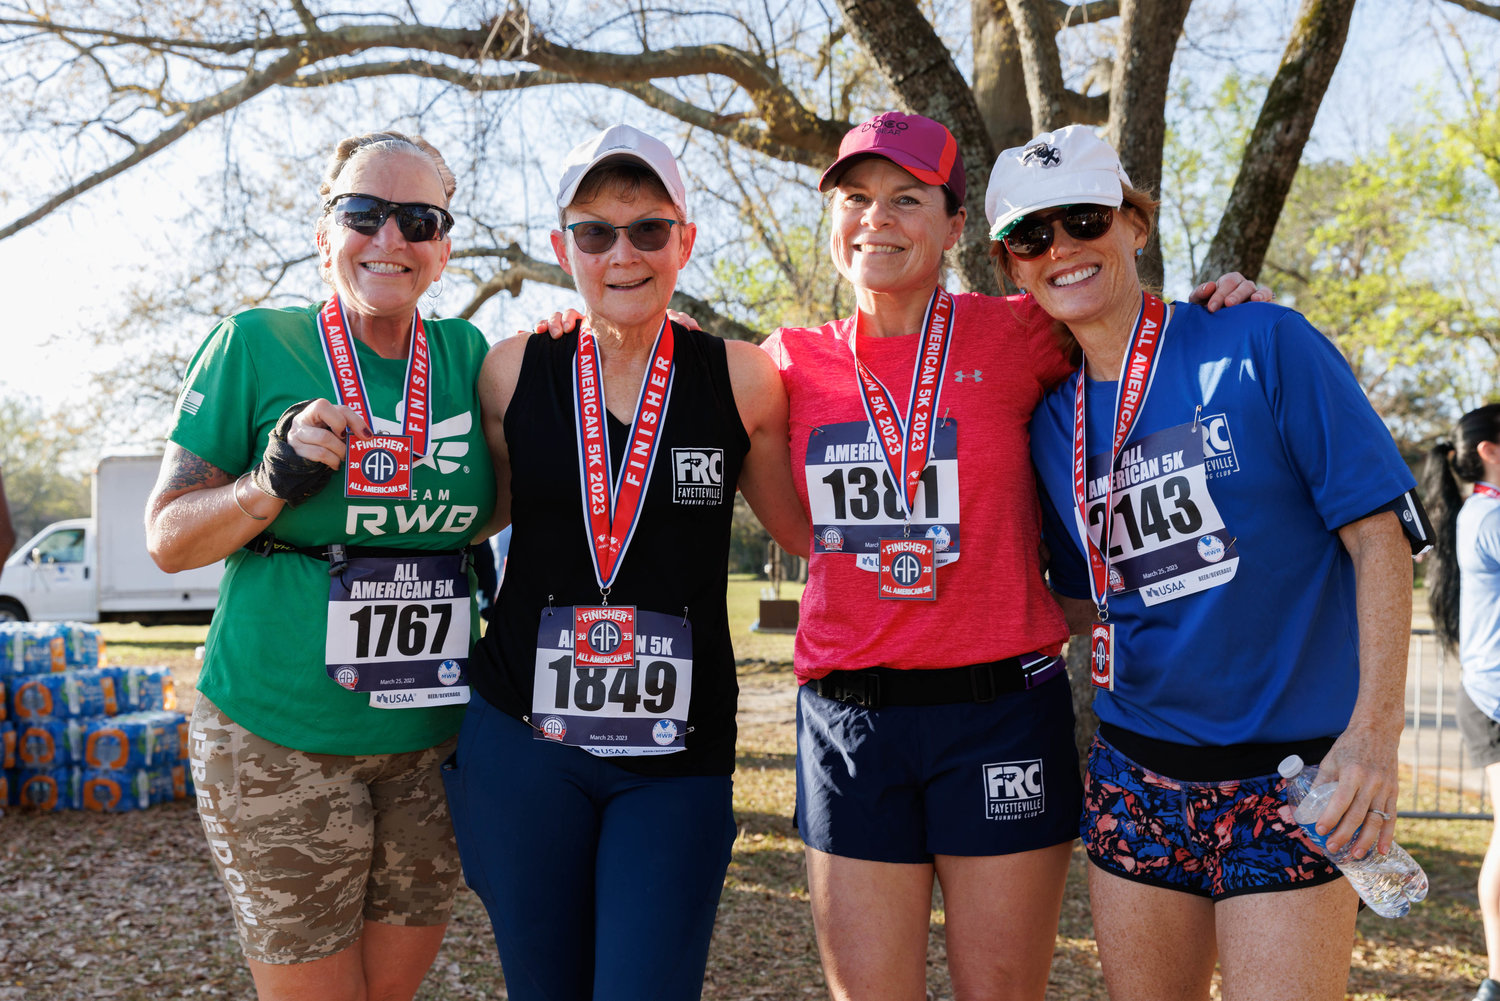 Fayetteville Running Club members Cathy Montes, KJ Powell, Katie Brewer, and Pam Falter pose for a portrait after finishing the All American Race on March 23, 2023.  Tony Wooten/CityView Media